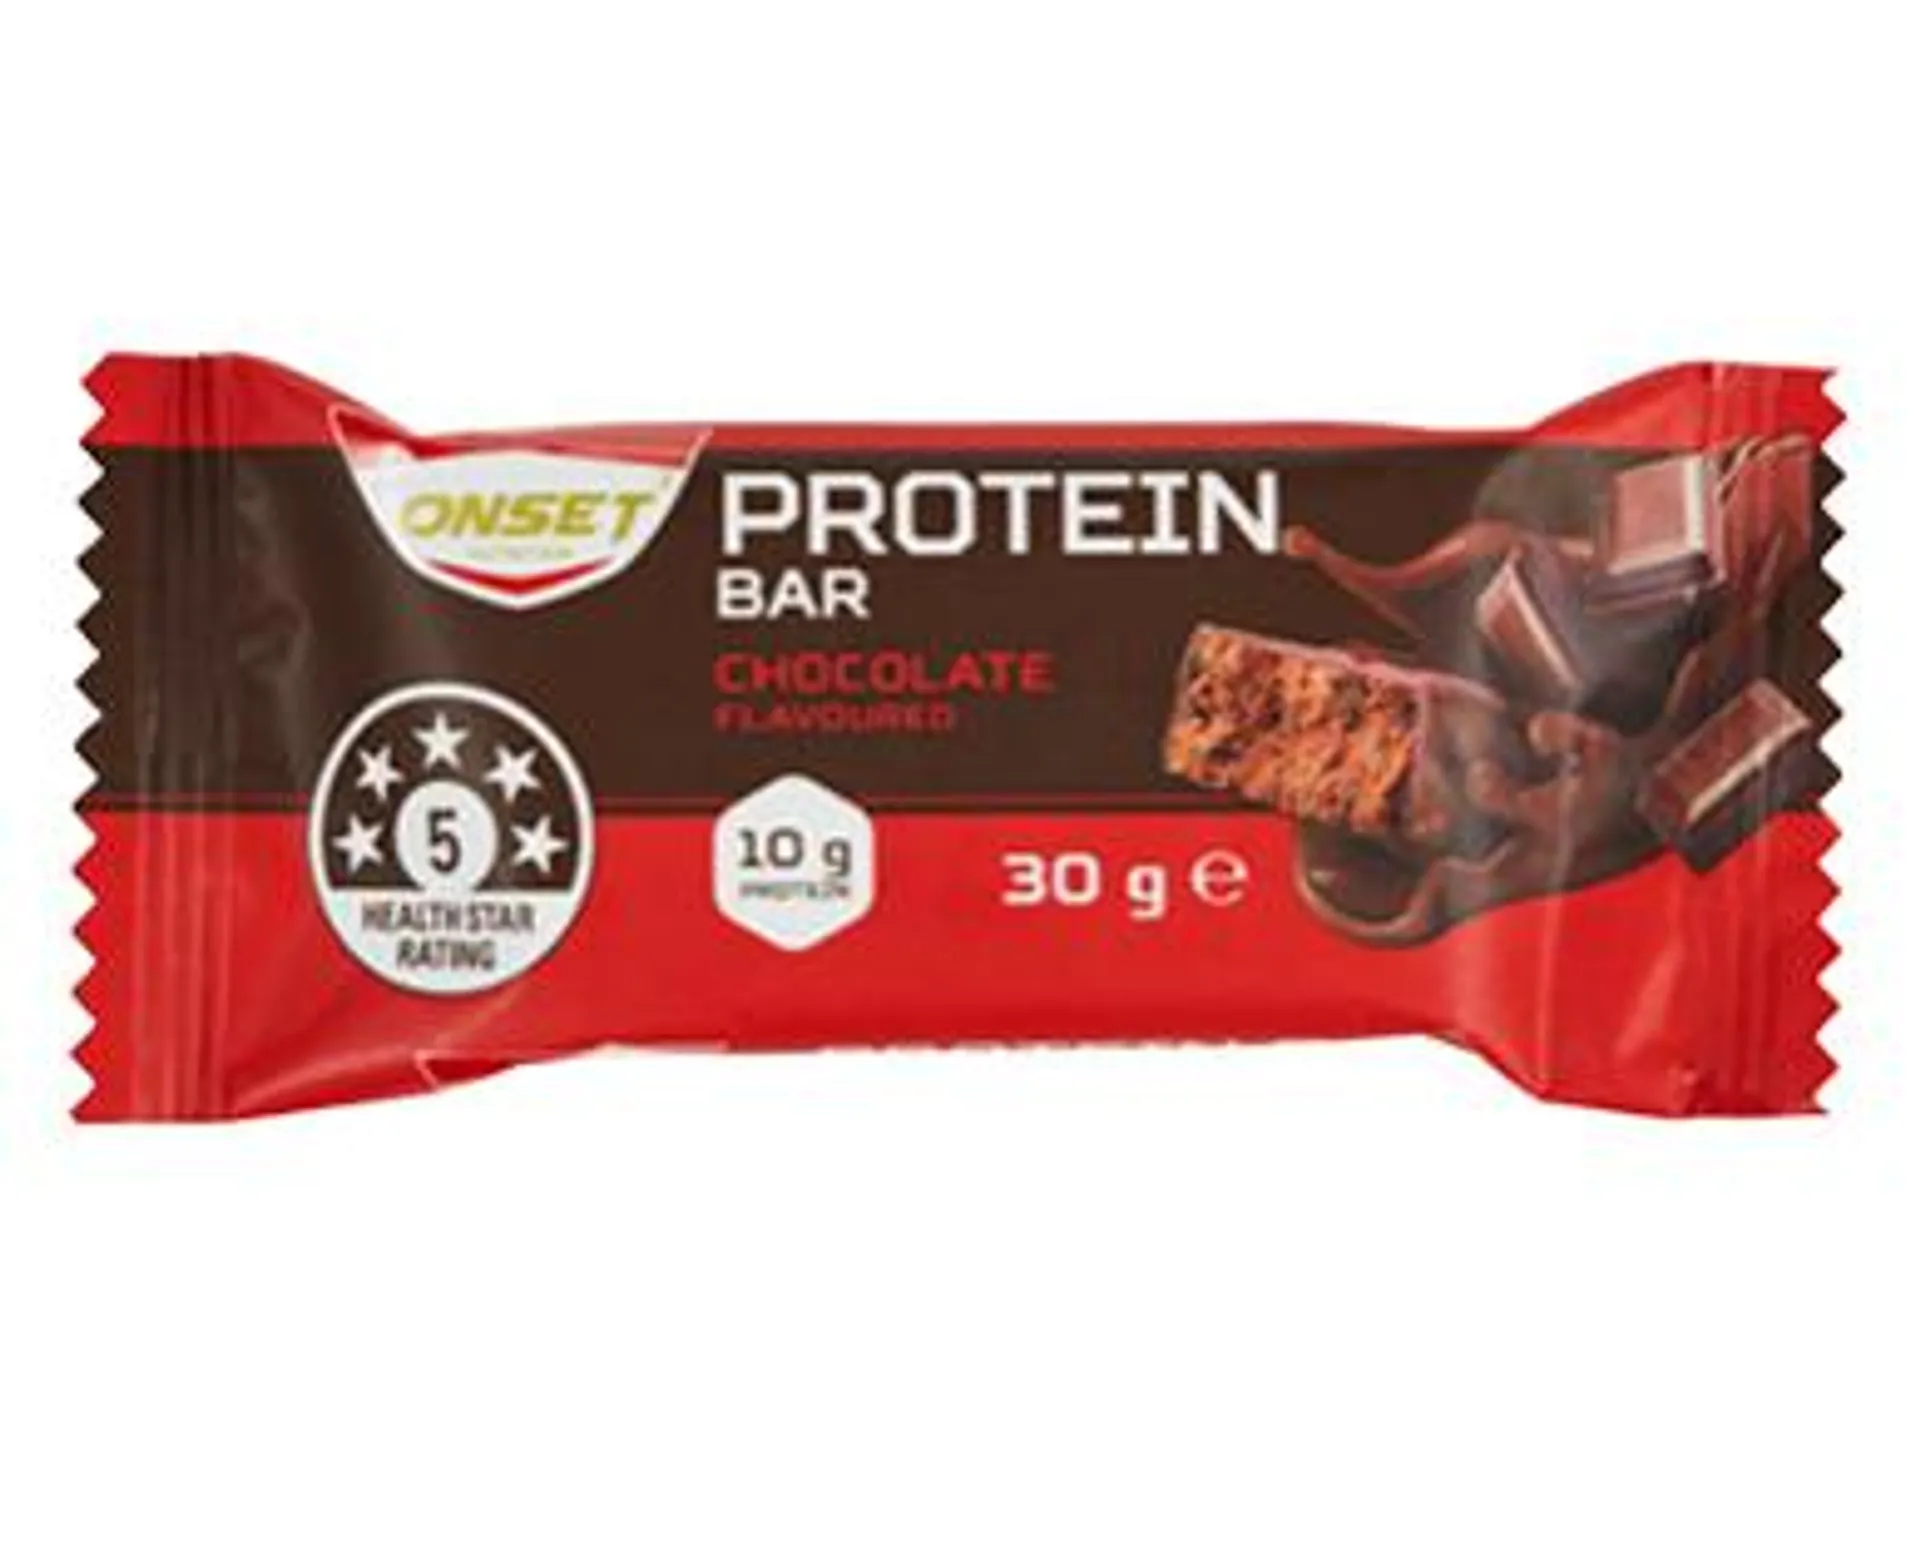 Onset Protein Bars 30g